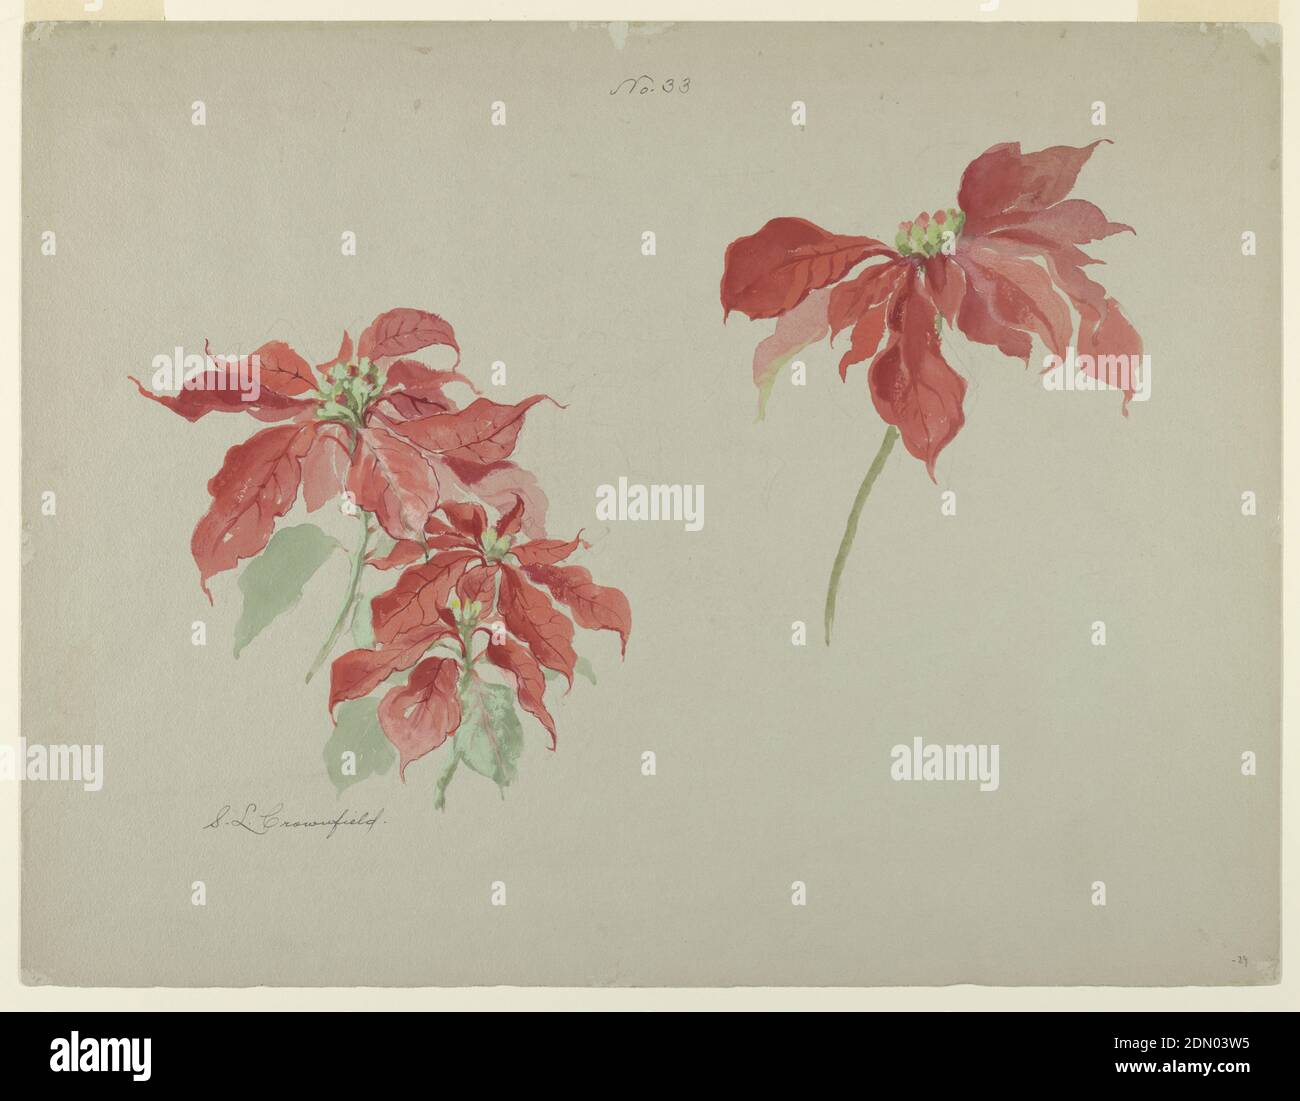 Study of Red Poinsettias, Sophia L. Crownfield, (American, 1862–1929), Brush and watercolor, graphite on gray paper, Horizontal sheet depicting two studies of poinsettias., USA, early 20th century, nature studies, Drawing Stock Photo